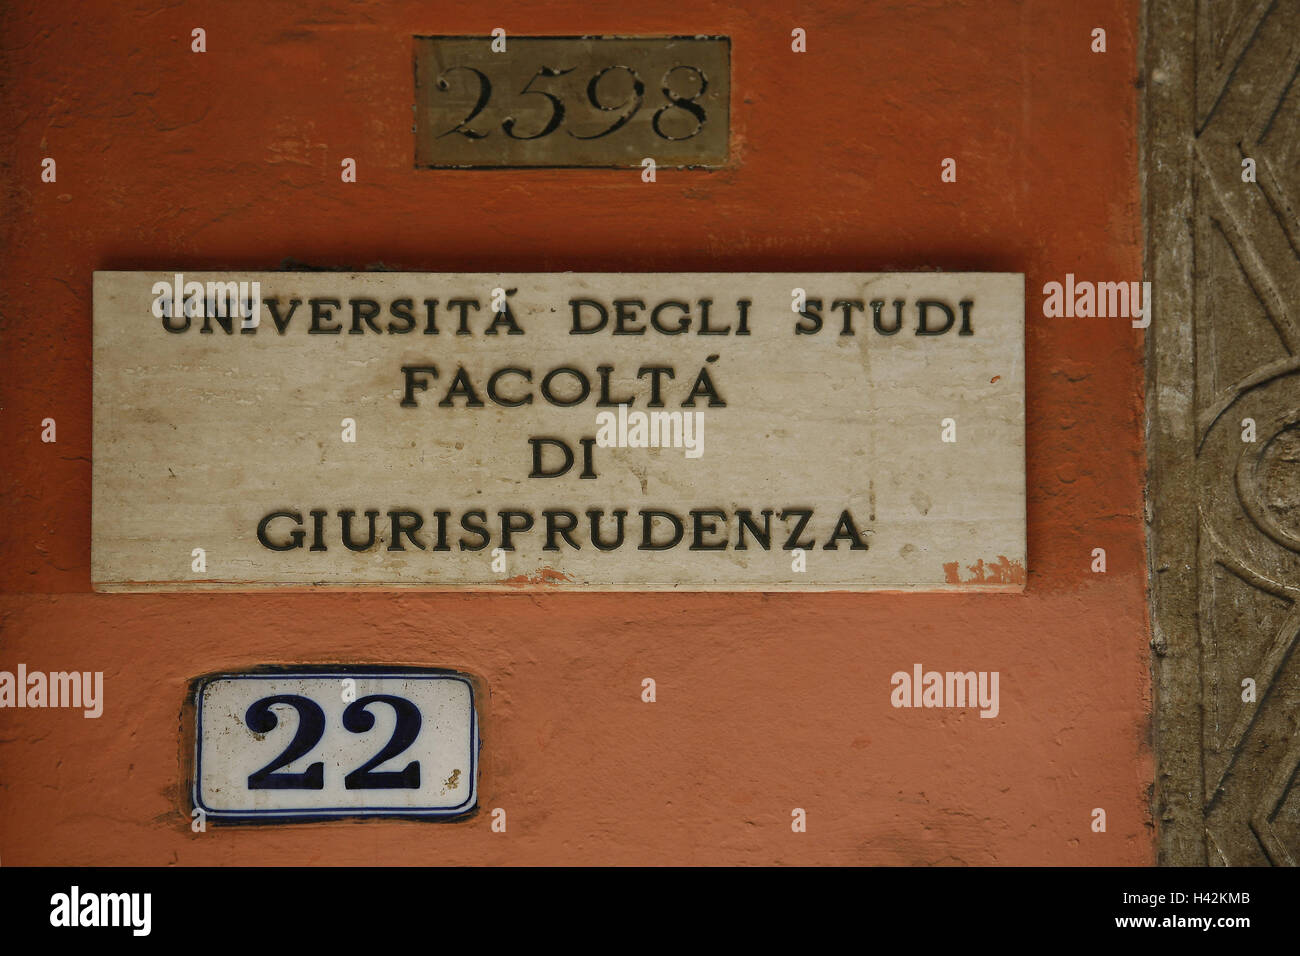 Italy, Emilia Romagna, Bologna, university, facade, via Zamboni, signs, detail, Europe, town, house number 22, education, educational institution, jurisprudence, Jura, place of interest, historically, building, outside, Stock Photo